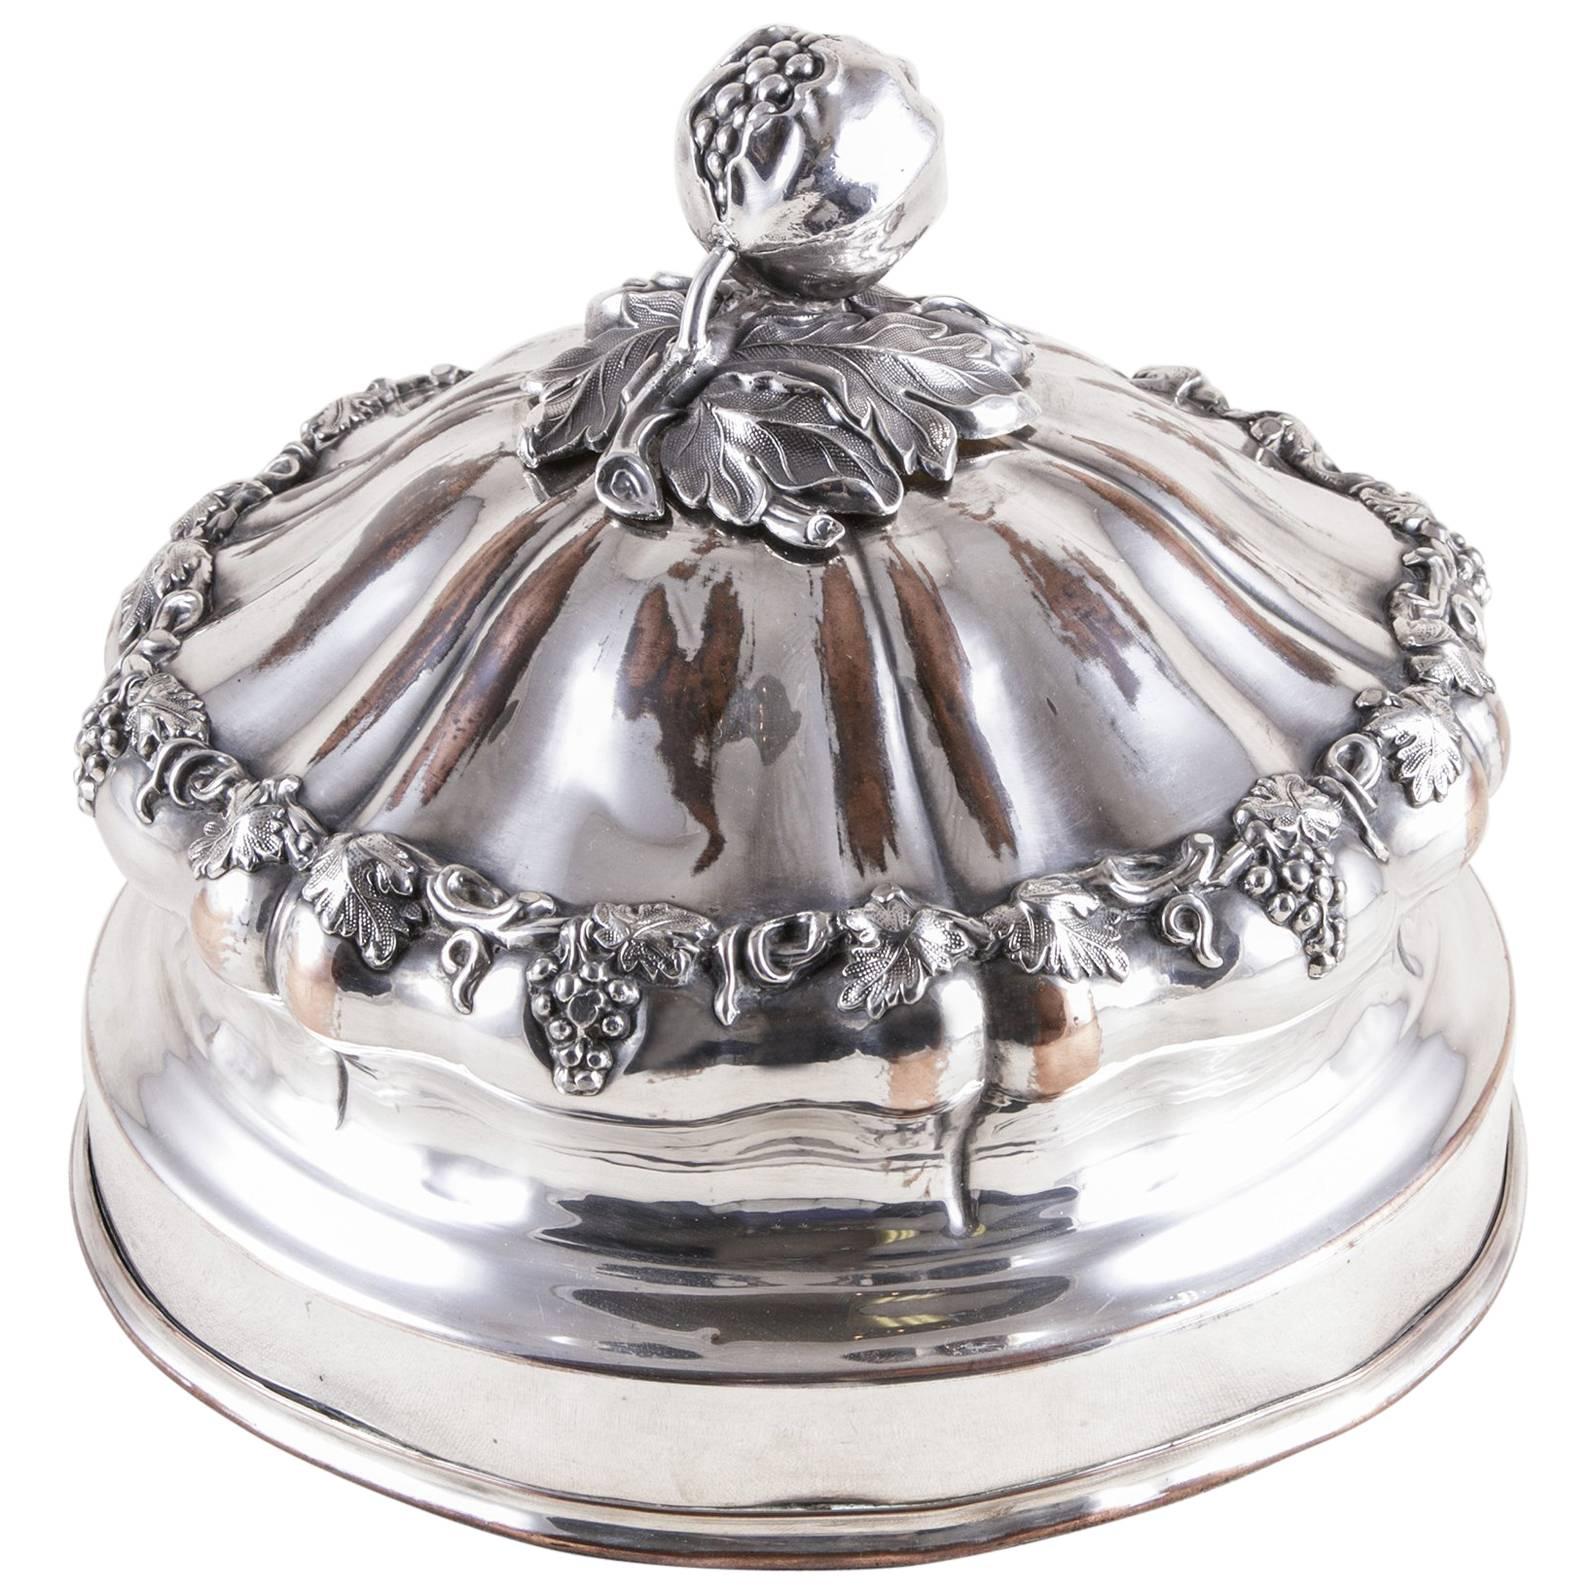 19th Century French Silver Hotel Dome Serving Piece Food Warmer Dish Cover